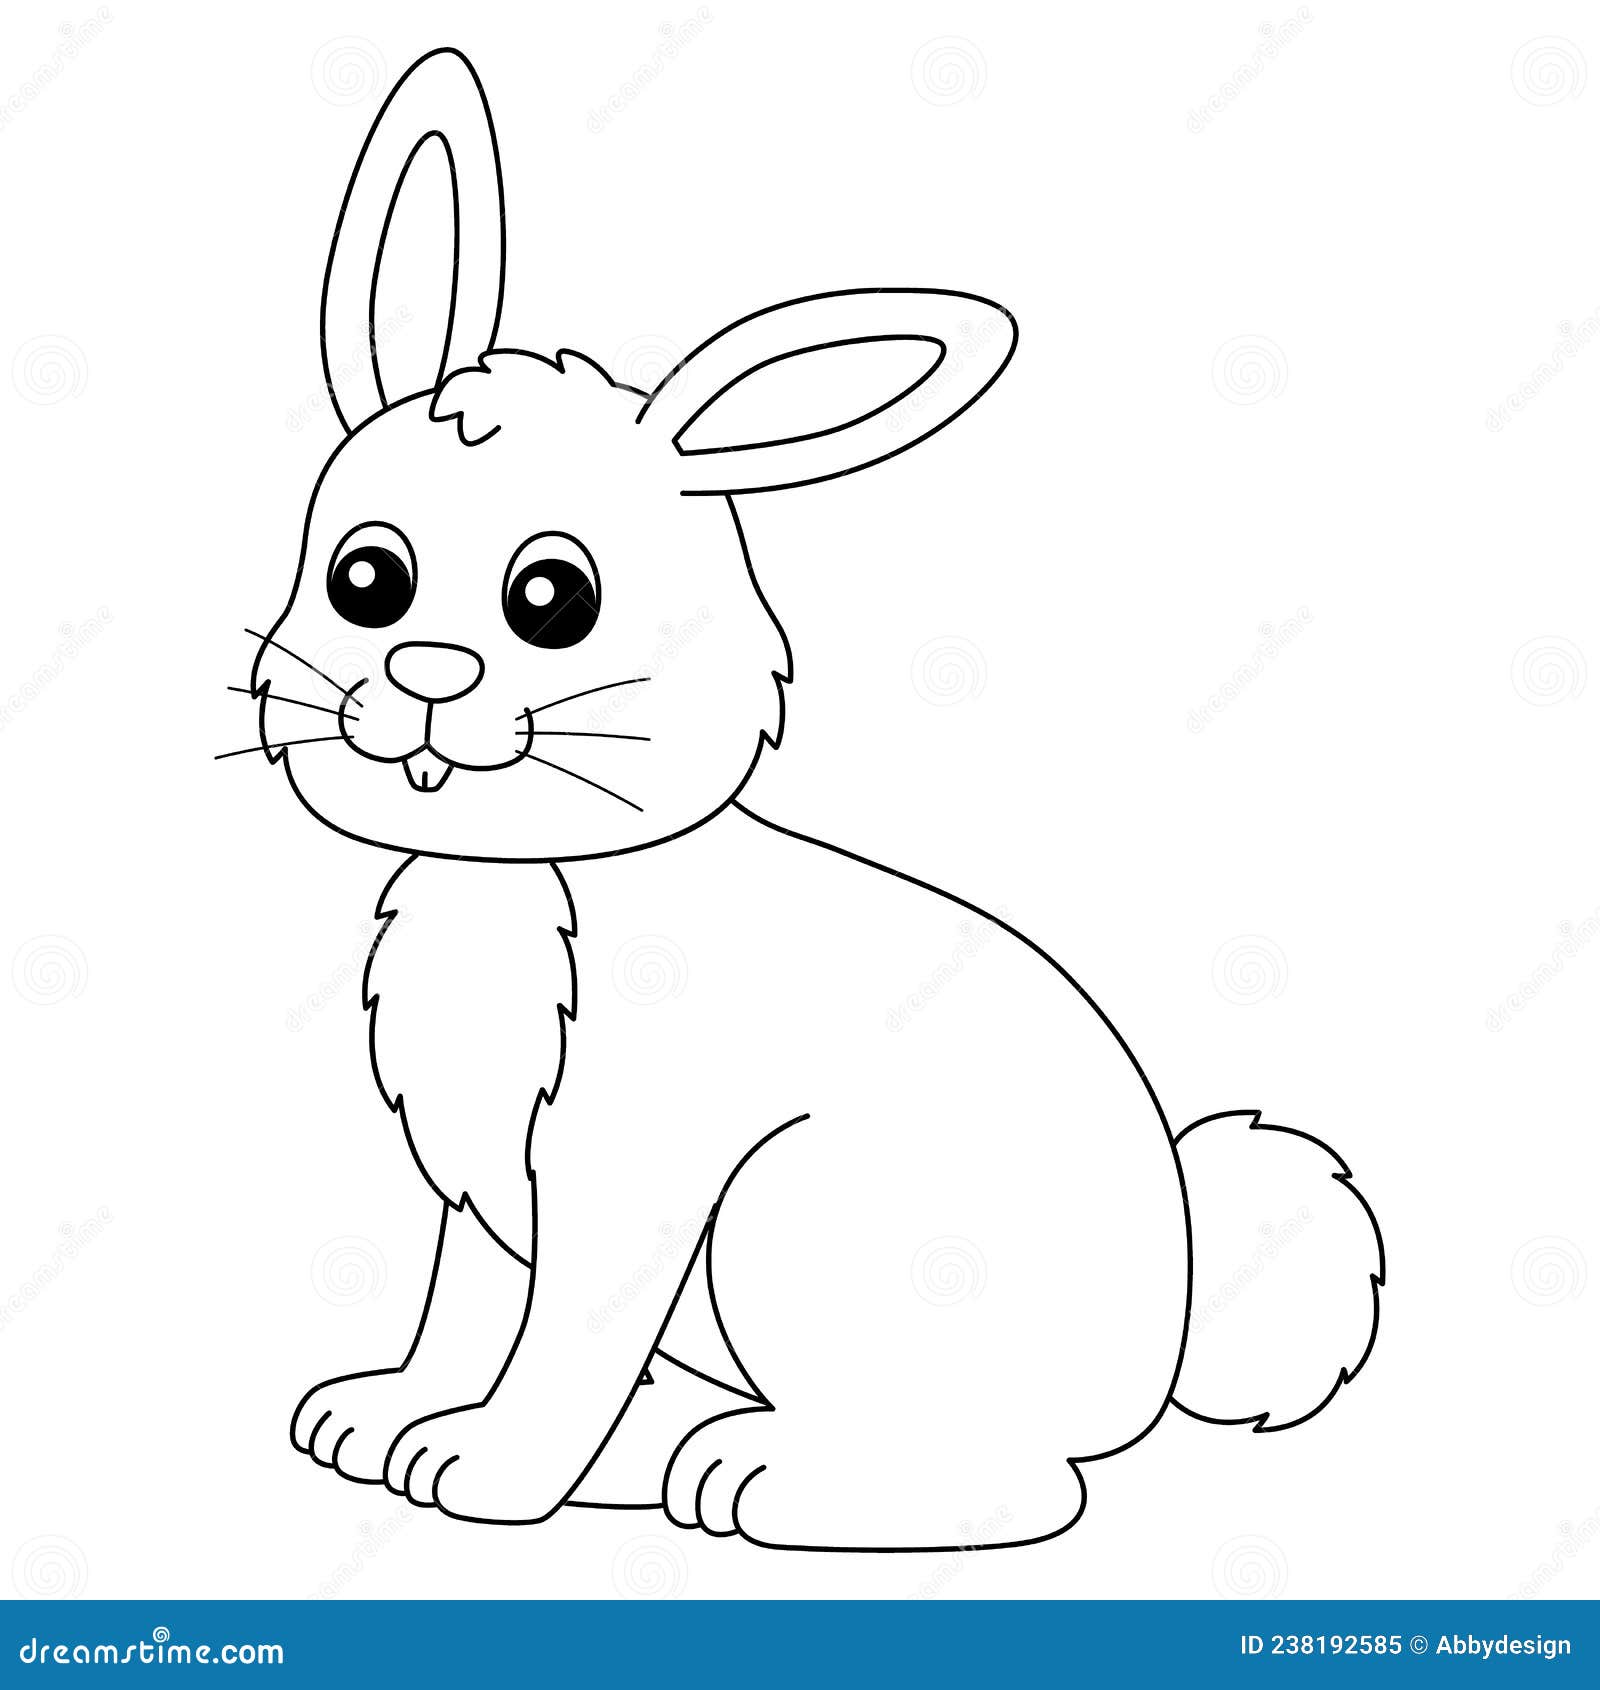 rabbit coloring page